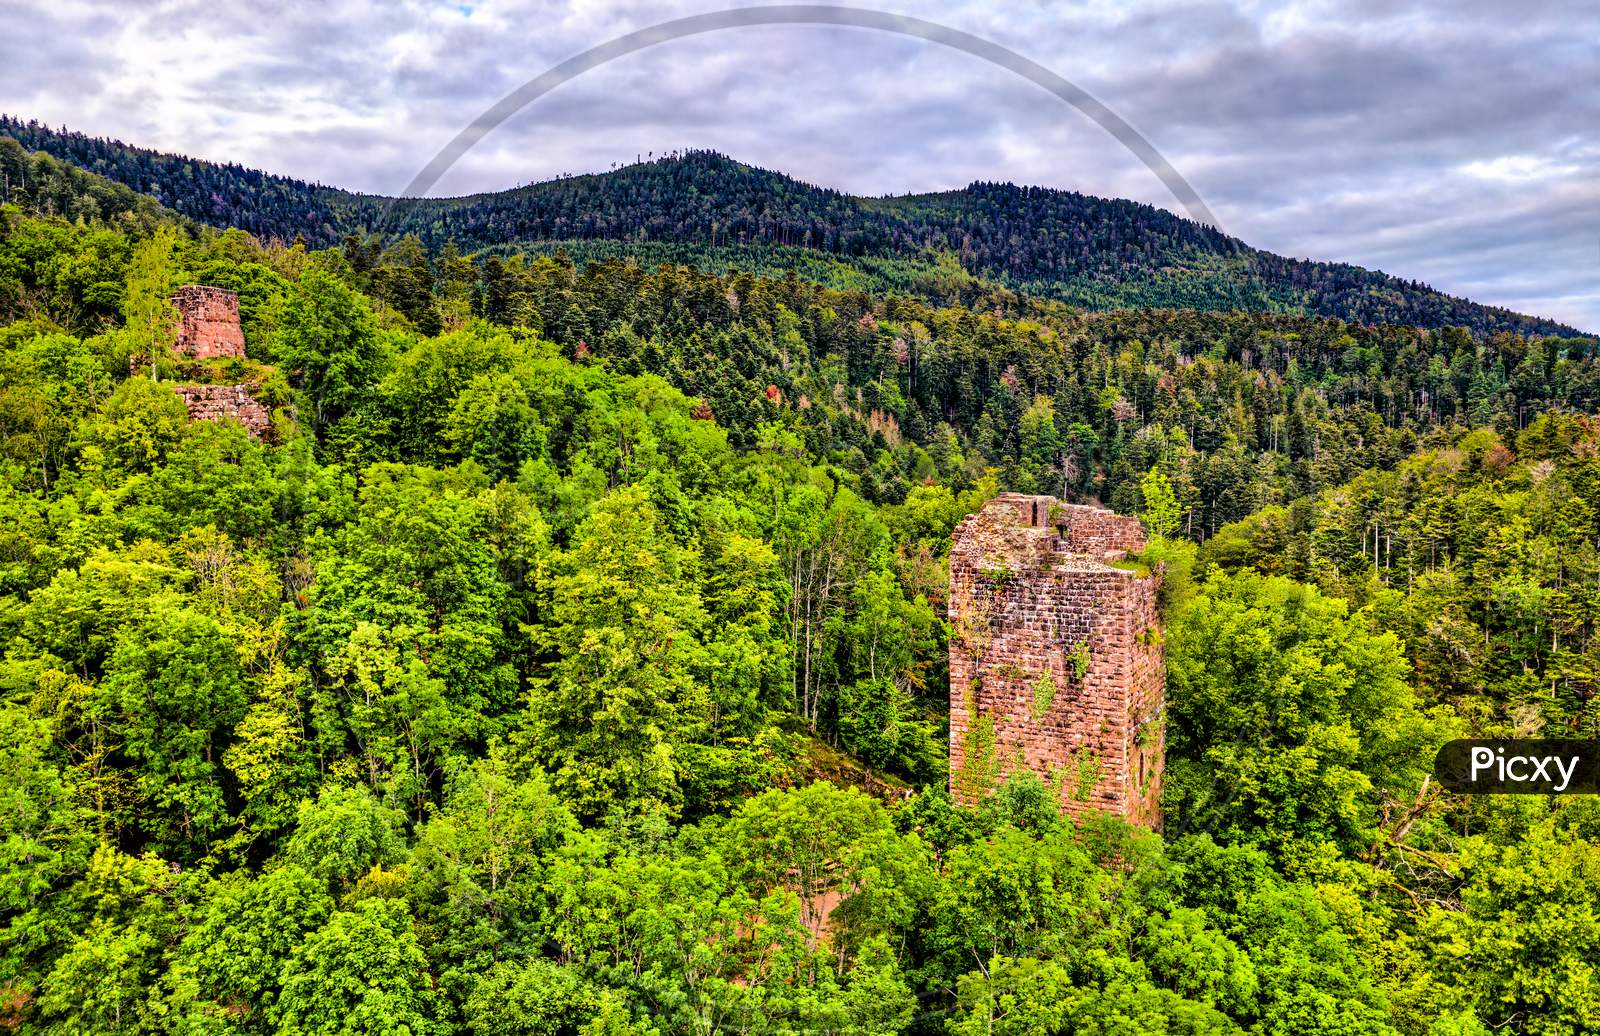 Nideck Castle In The Vosges Mountains - Bas-Rhin, Alsace, France